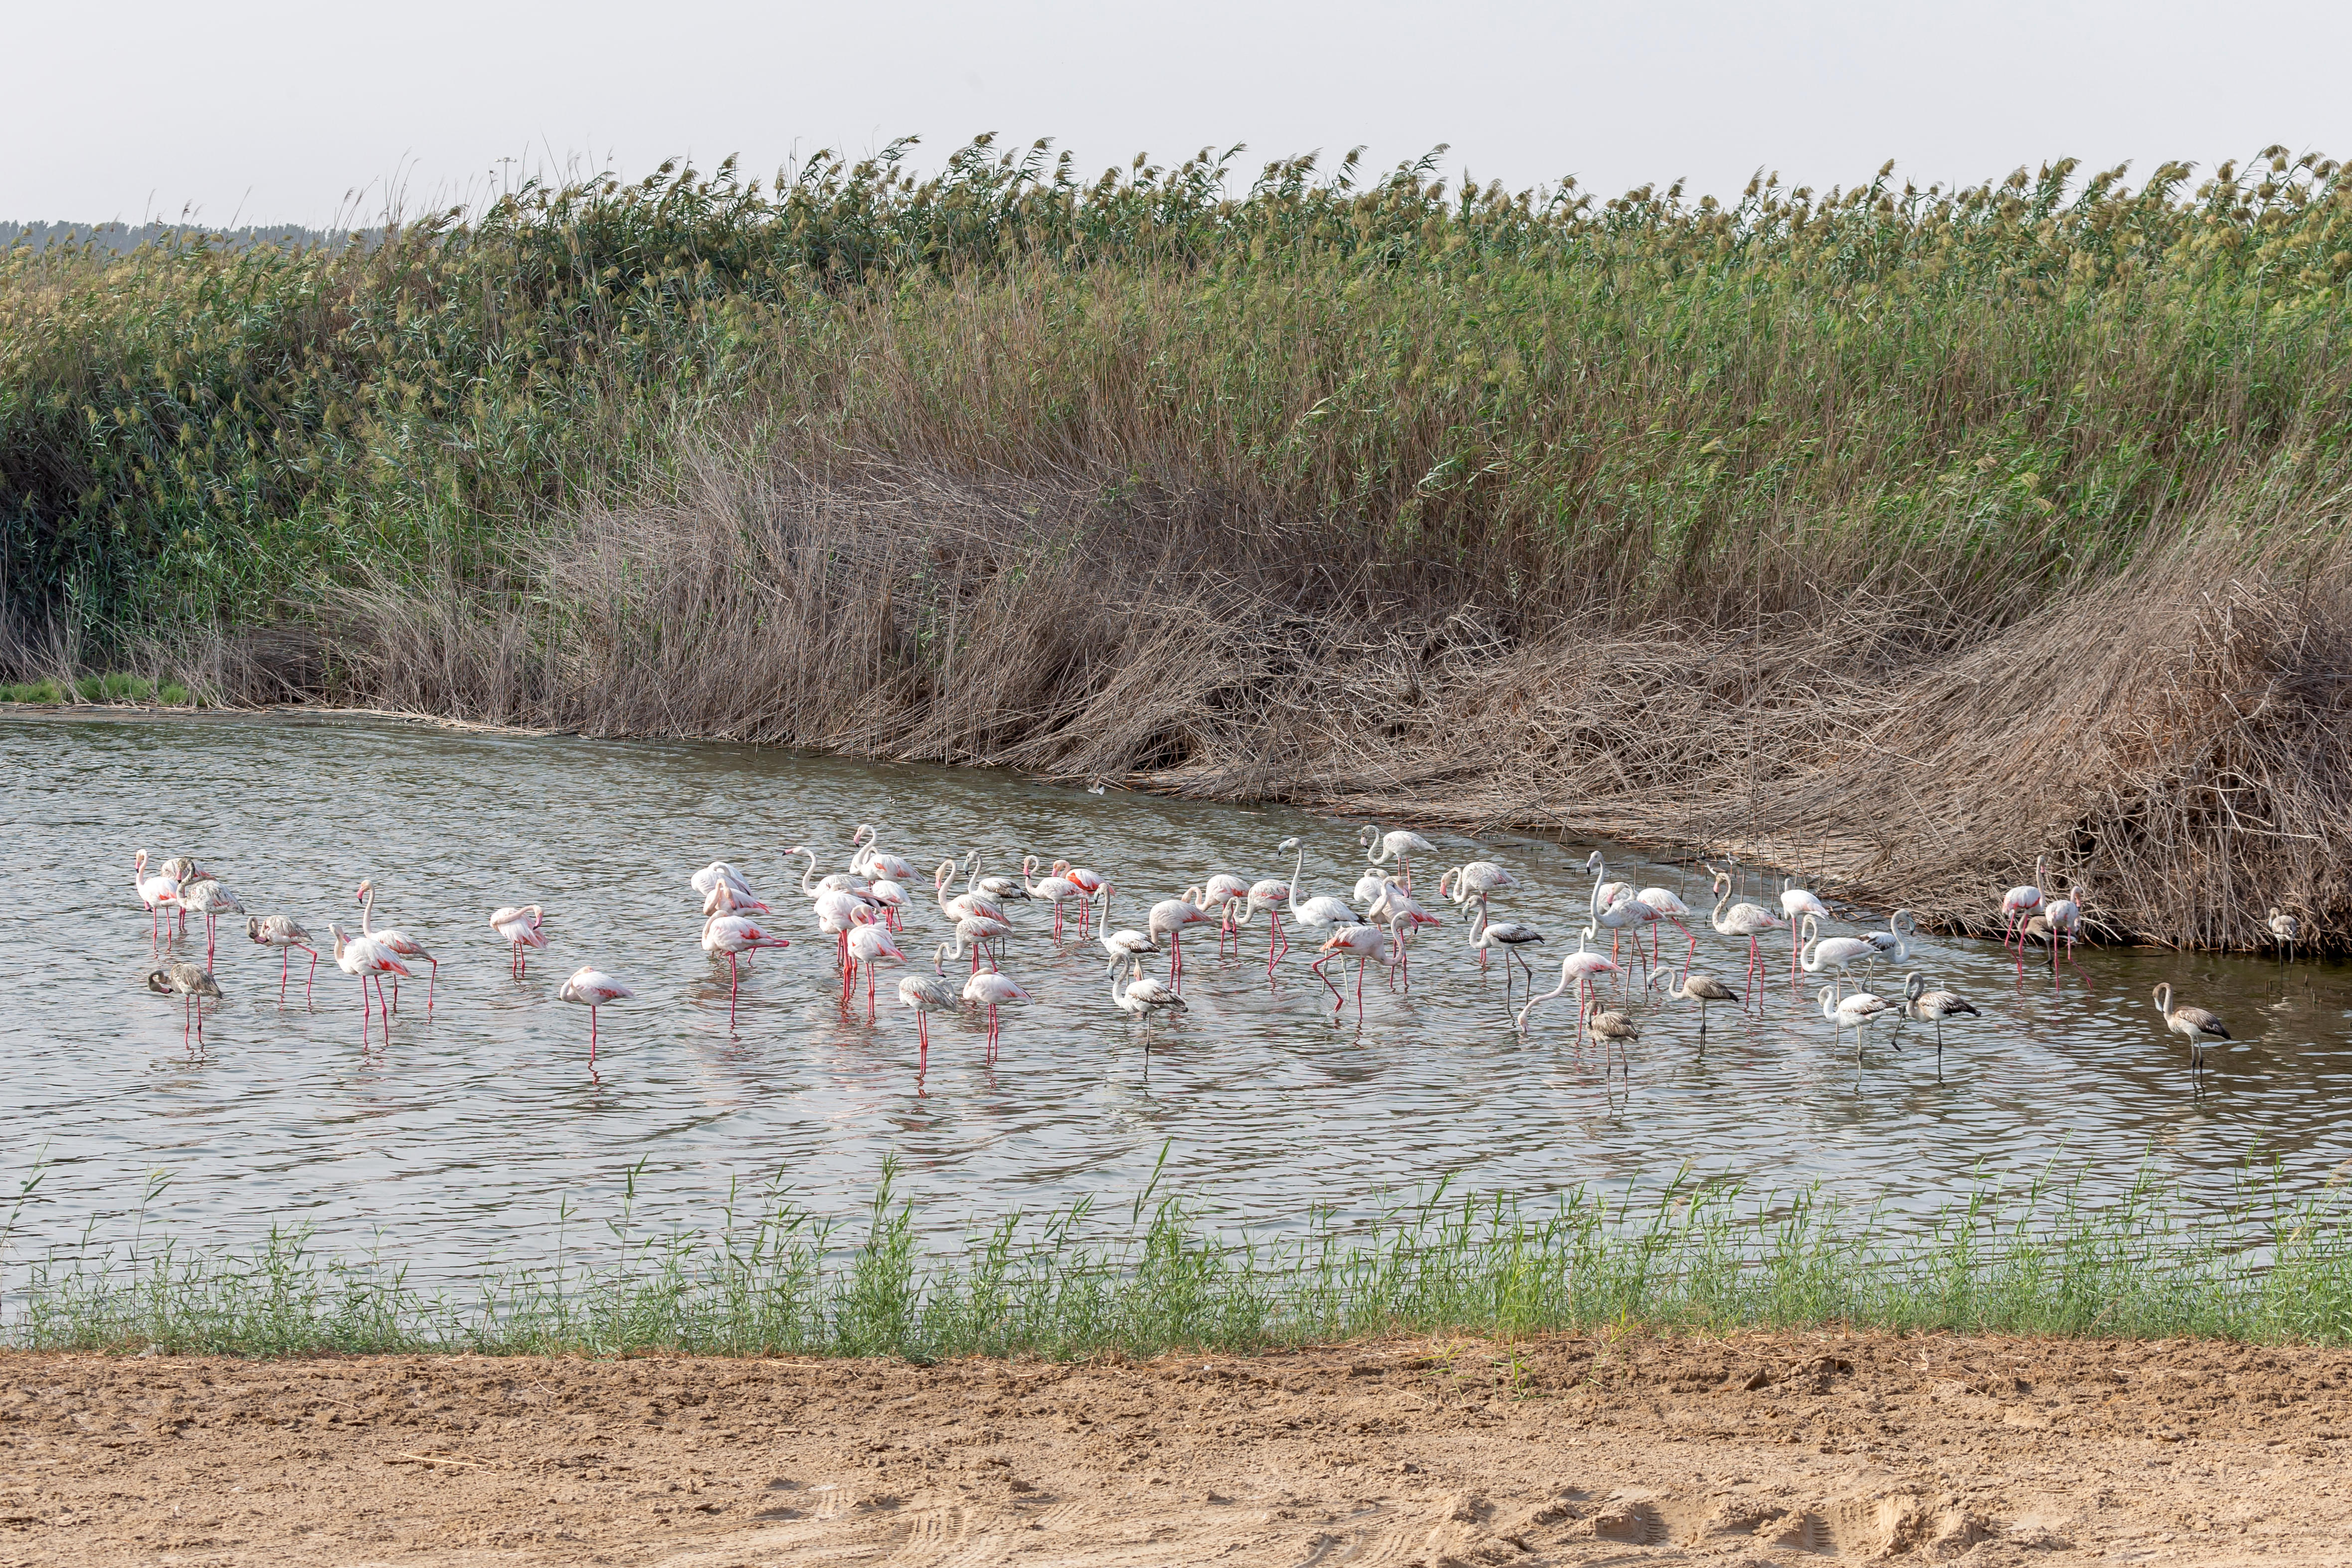 See the large group of Greater Flamingos